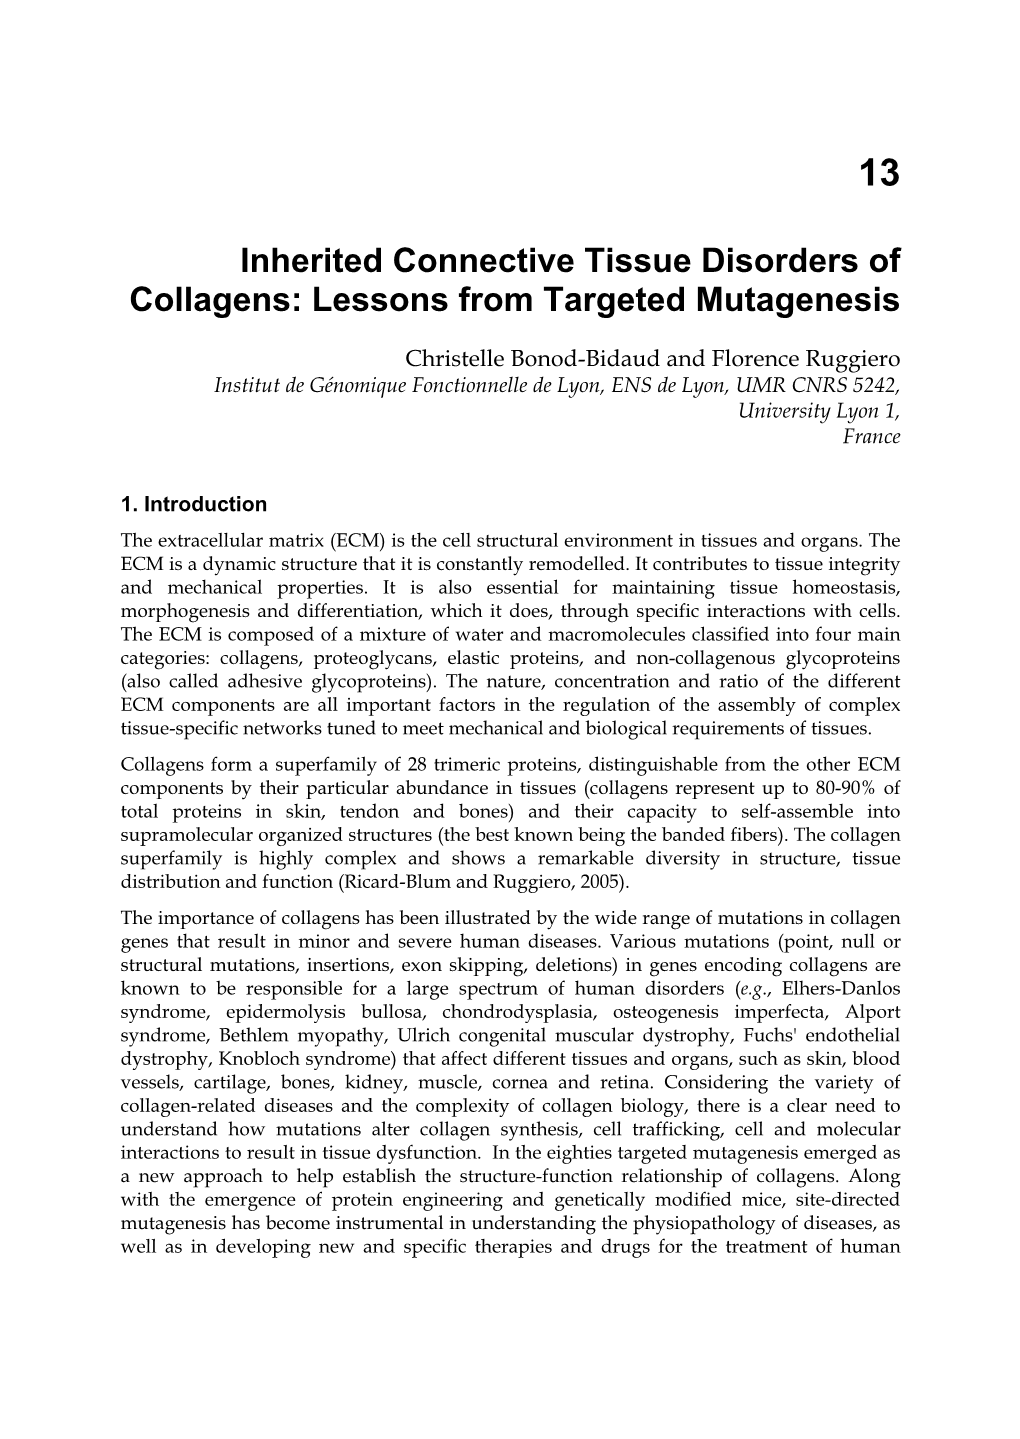 Inherited Connective Tissue Disorders of Collagens: Lessons from Targeted Mutagenesis